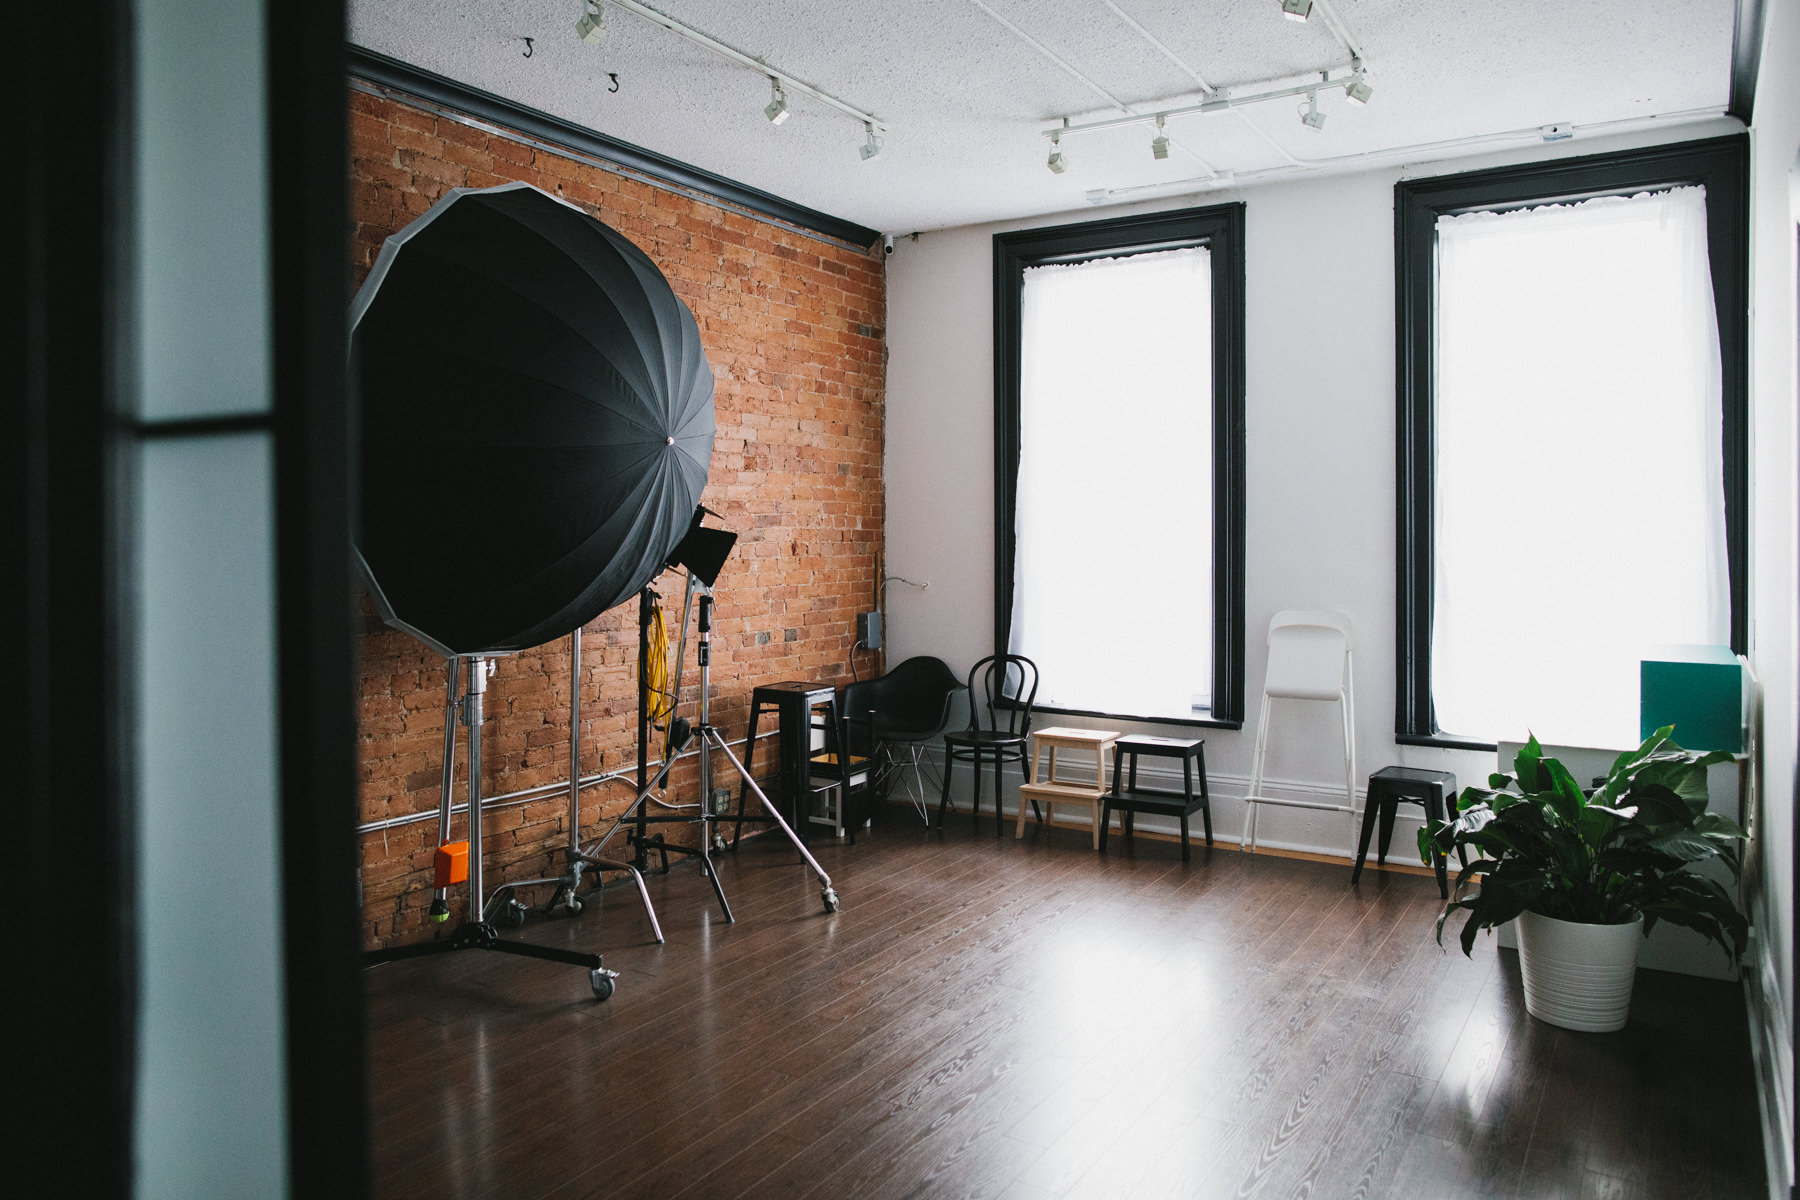 Photography studio with 2 large floor to ceiling windows, studio lights and lots of seating props.